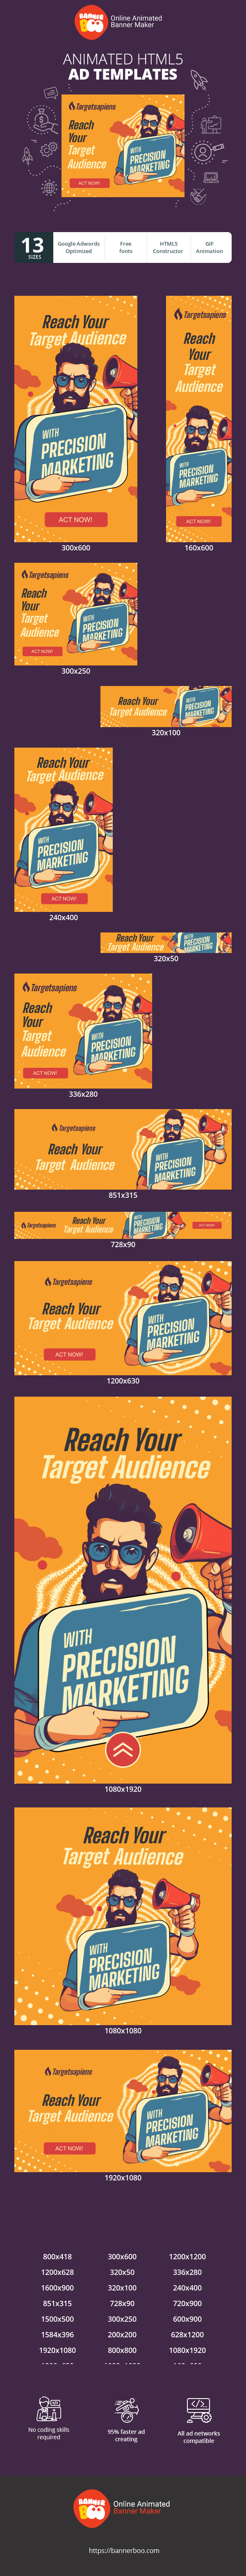 Banner ad template — Reach Your Target Audience with Precision Marketing — Agencies